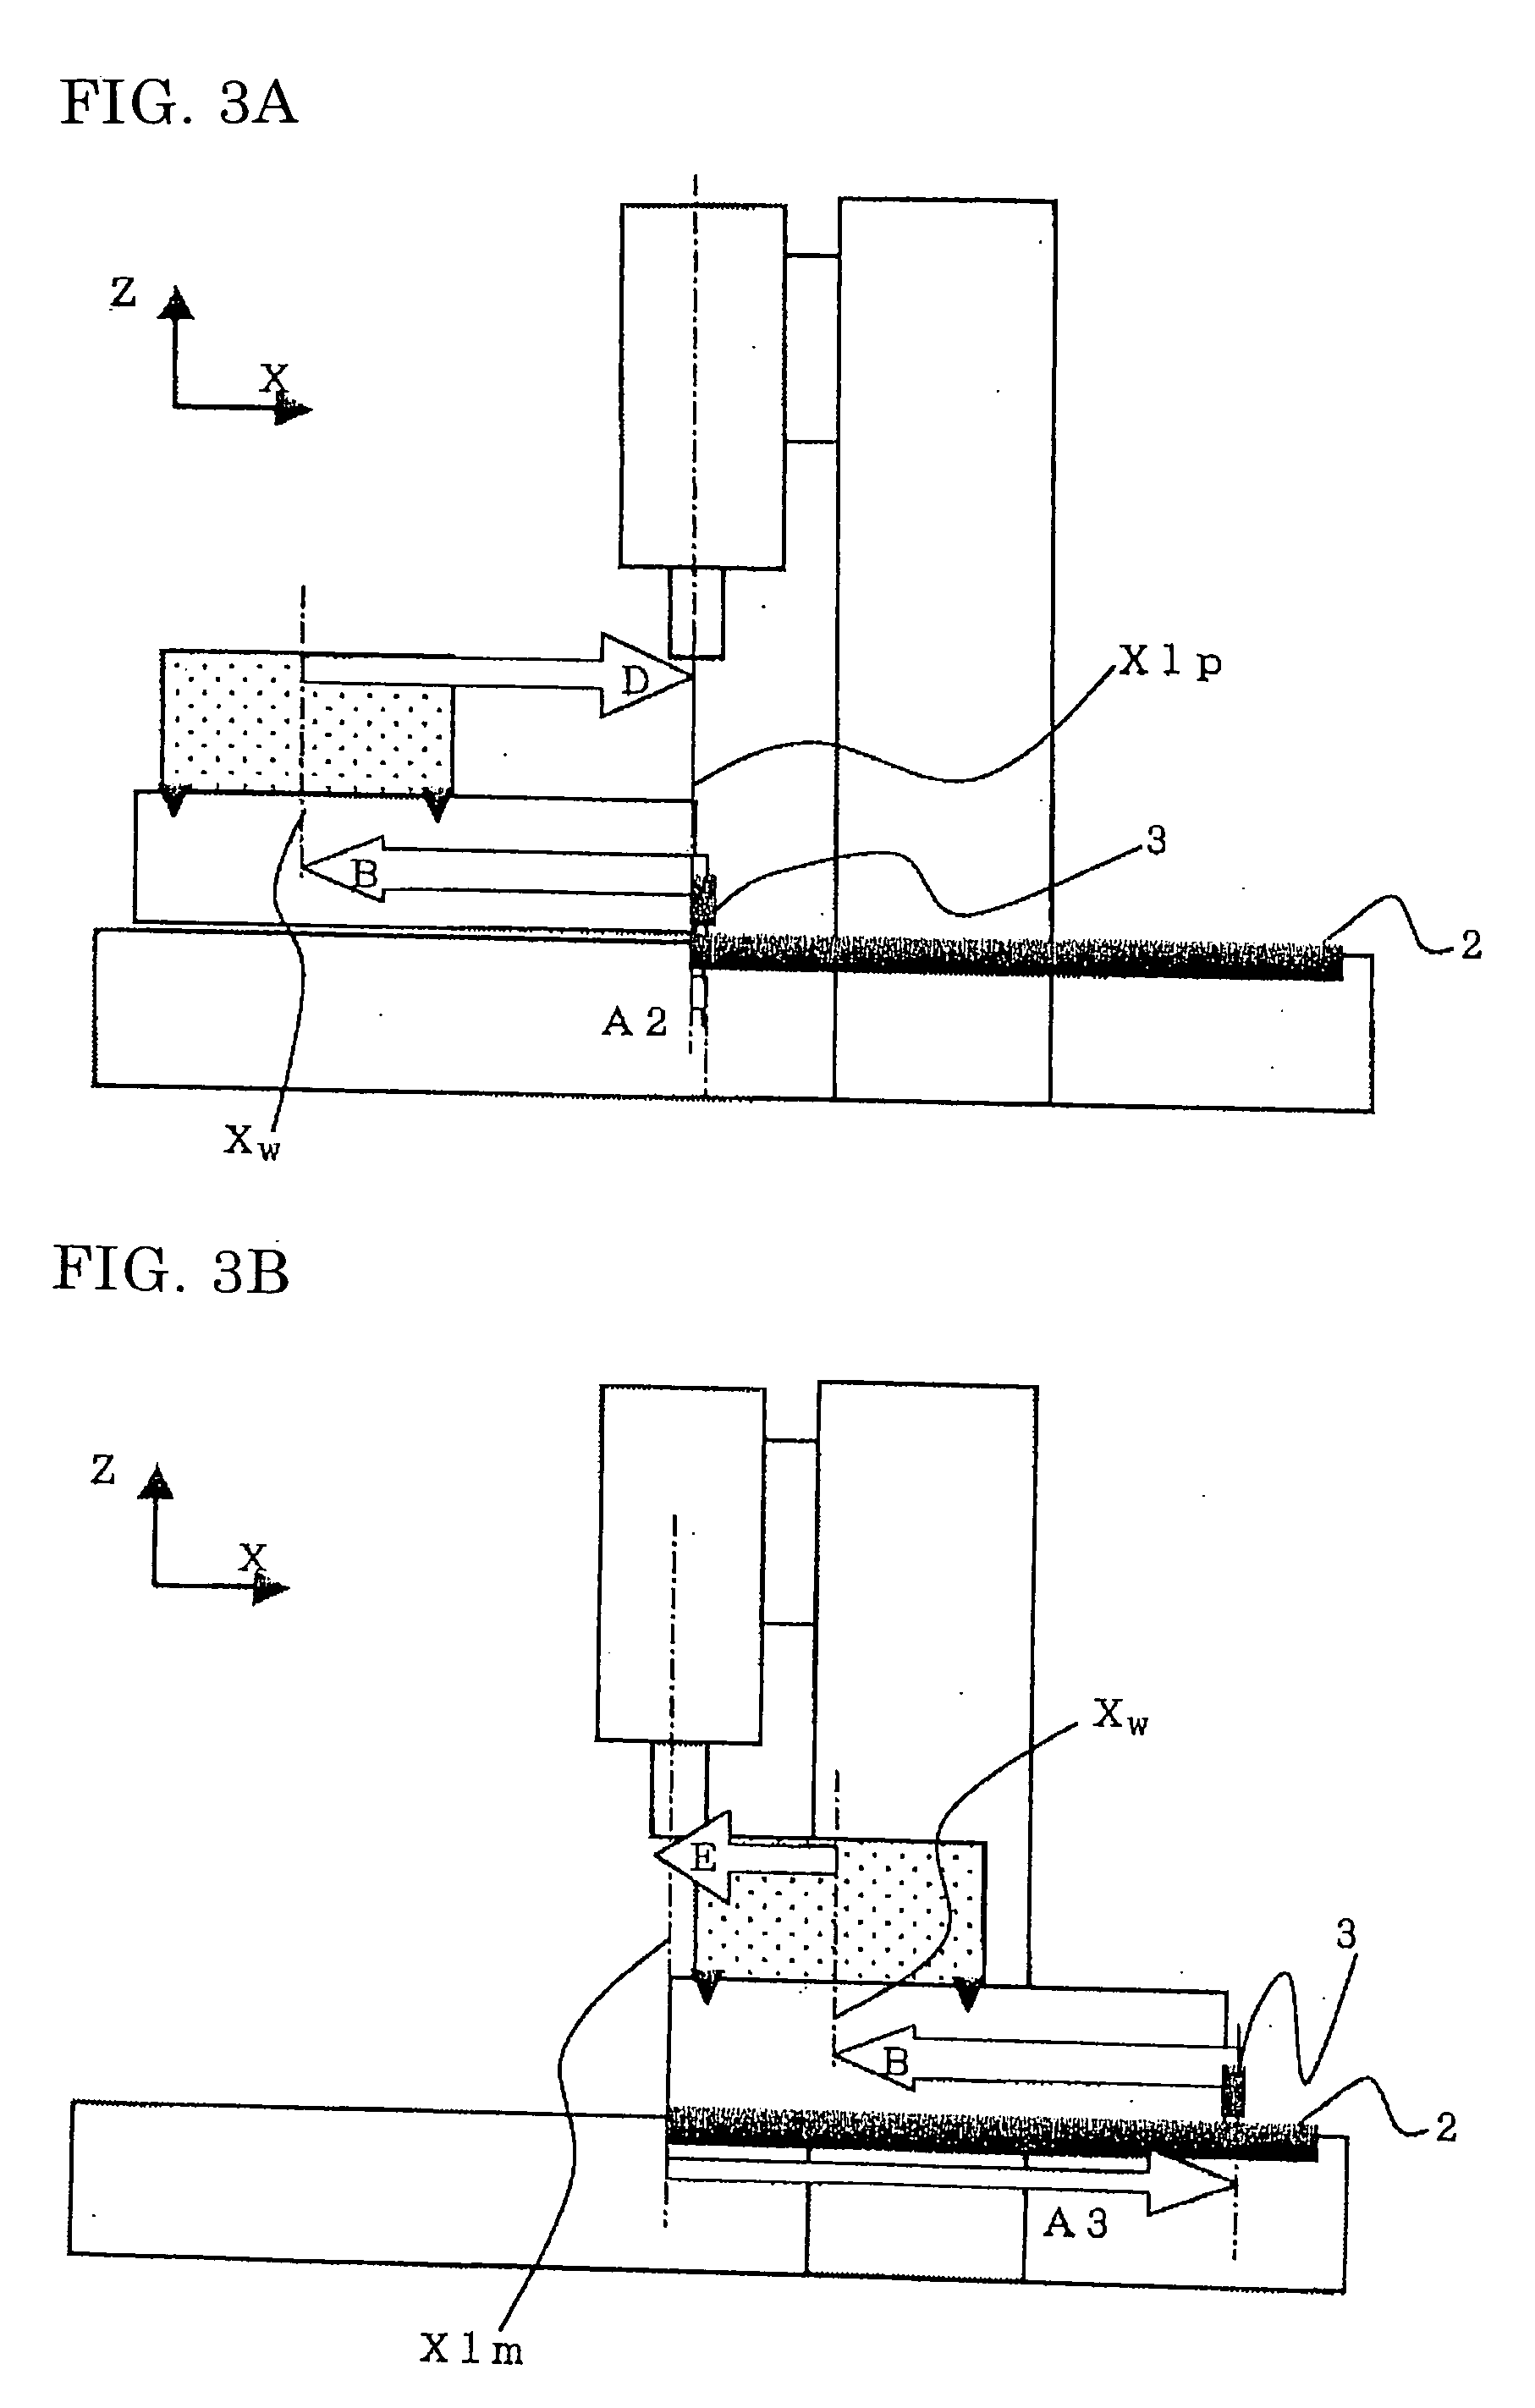 Method for correcting thermal displacement in a machine tool